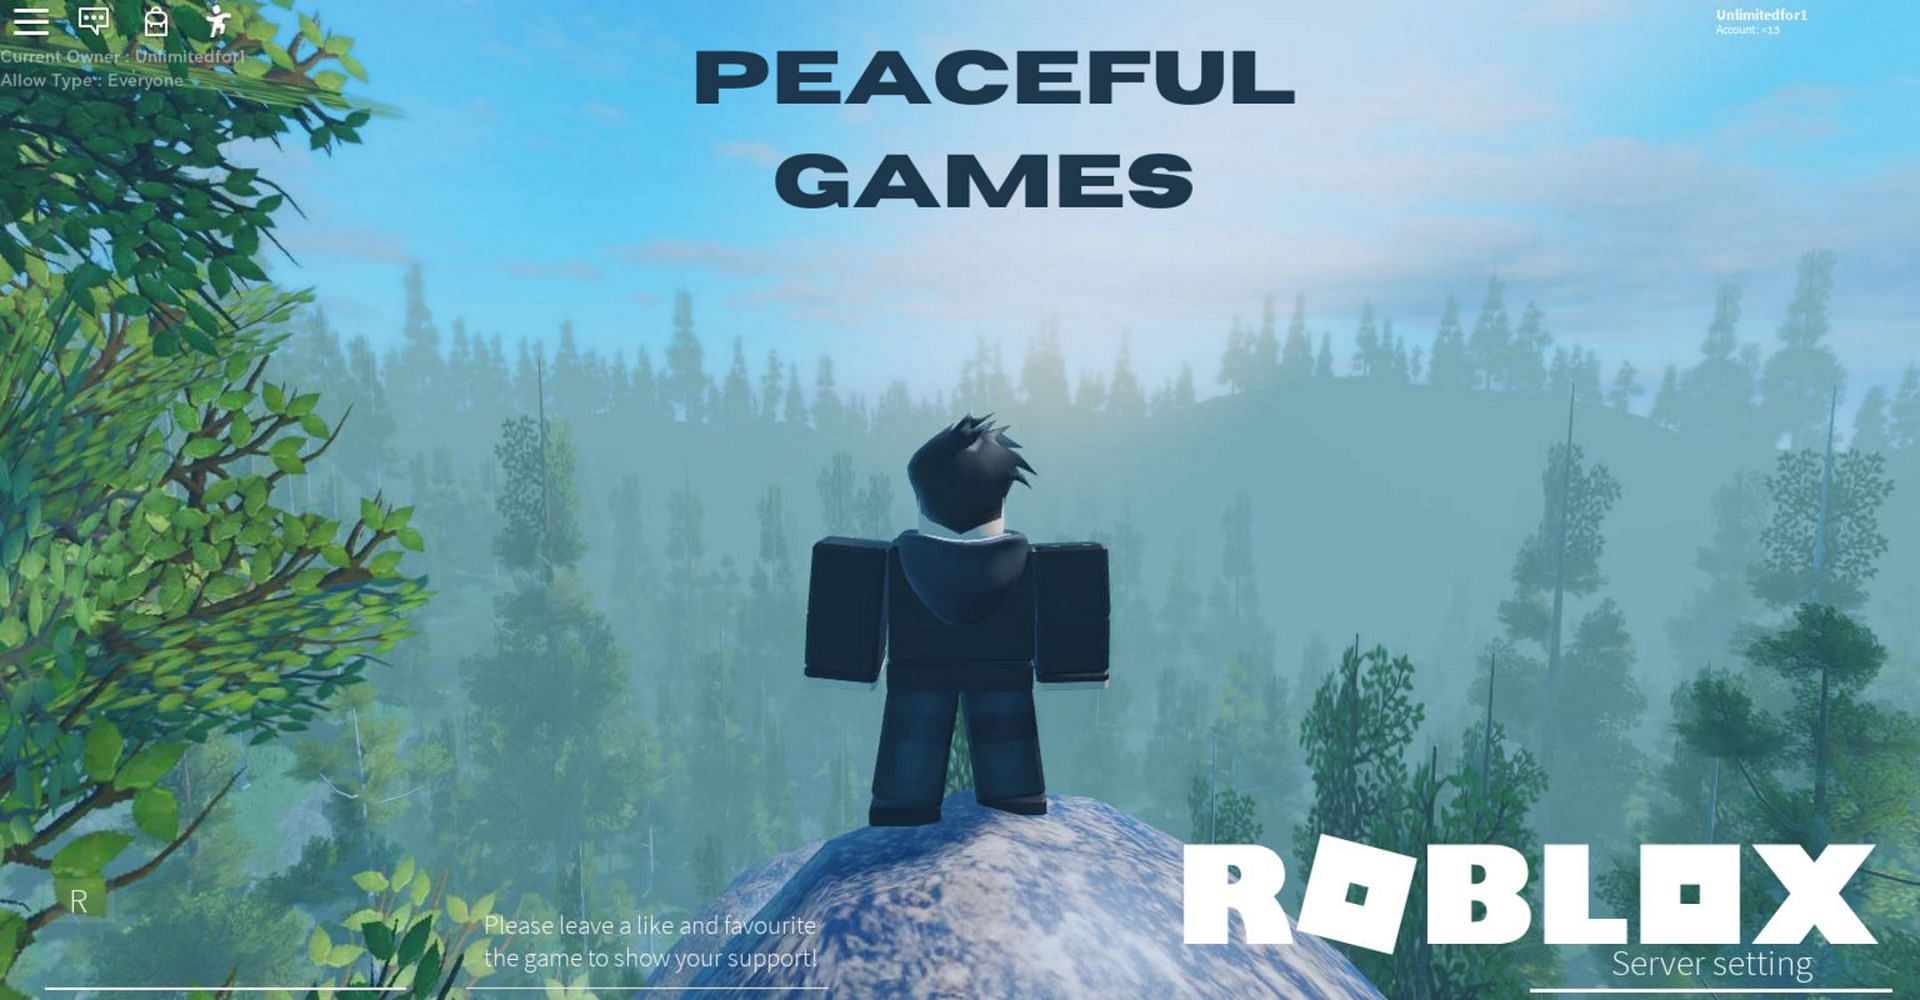 brookhaven rn with almost one million players active. : r/roblox